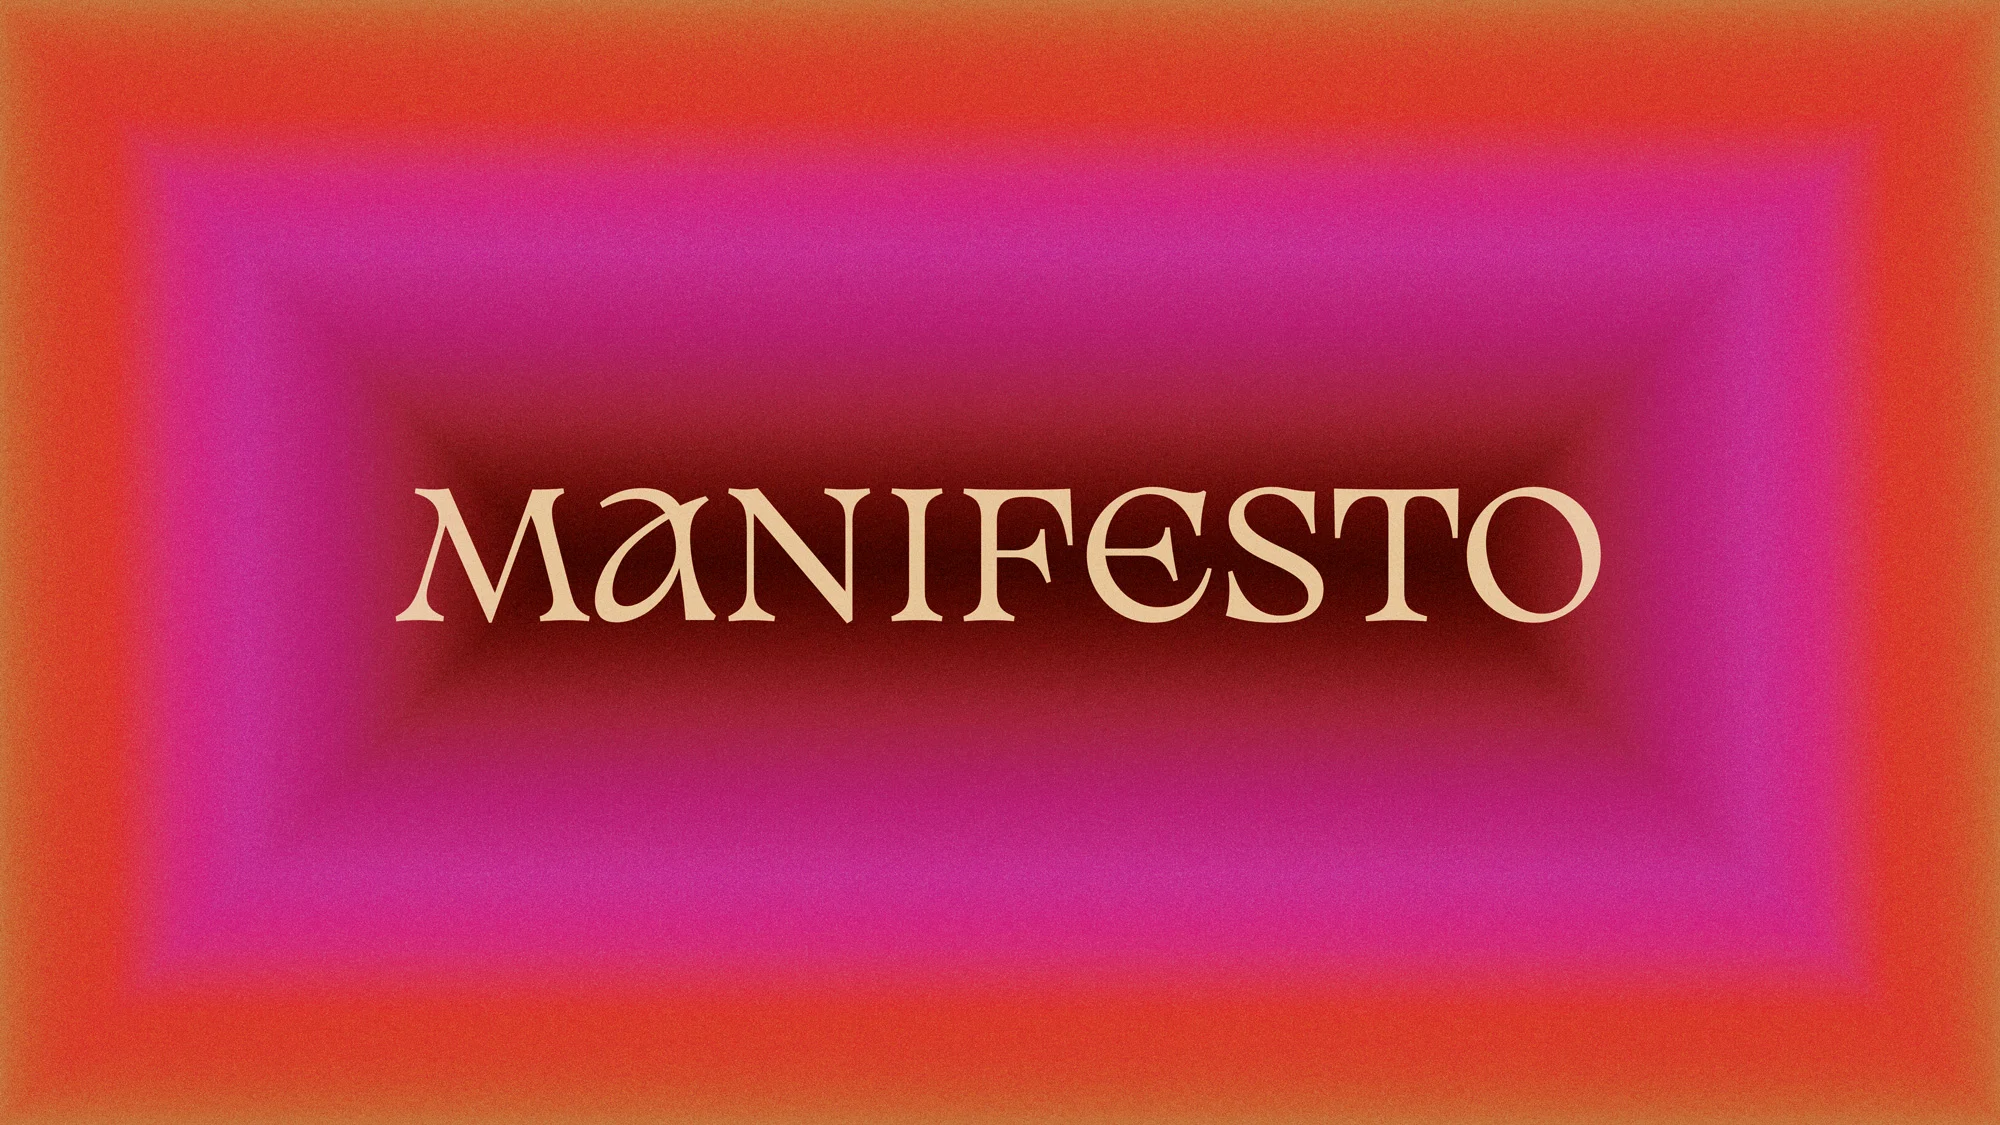 Cover Image - A Manifesto by Marley Dias